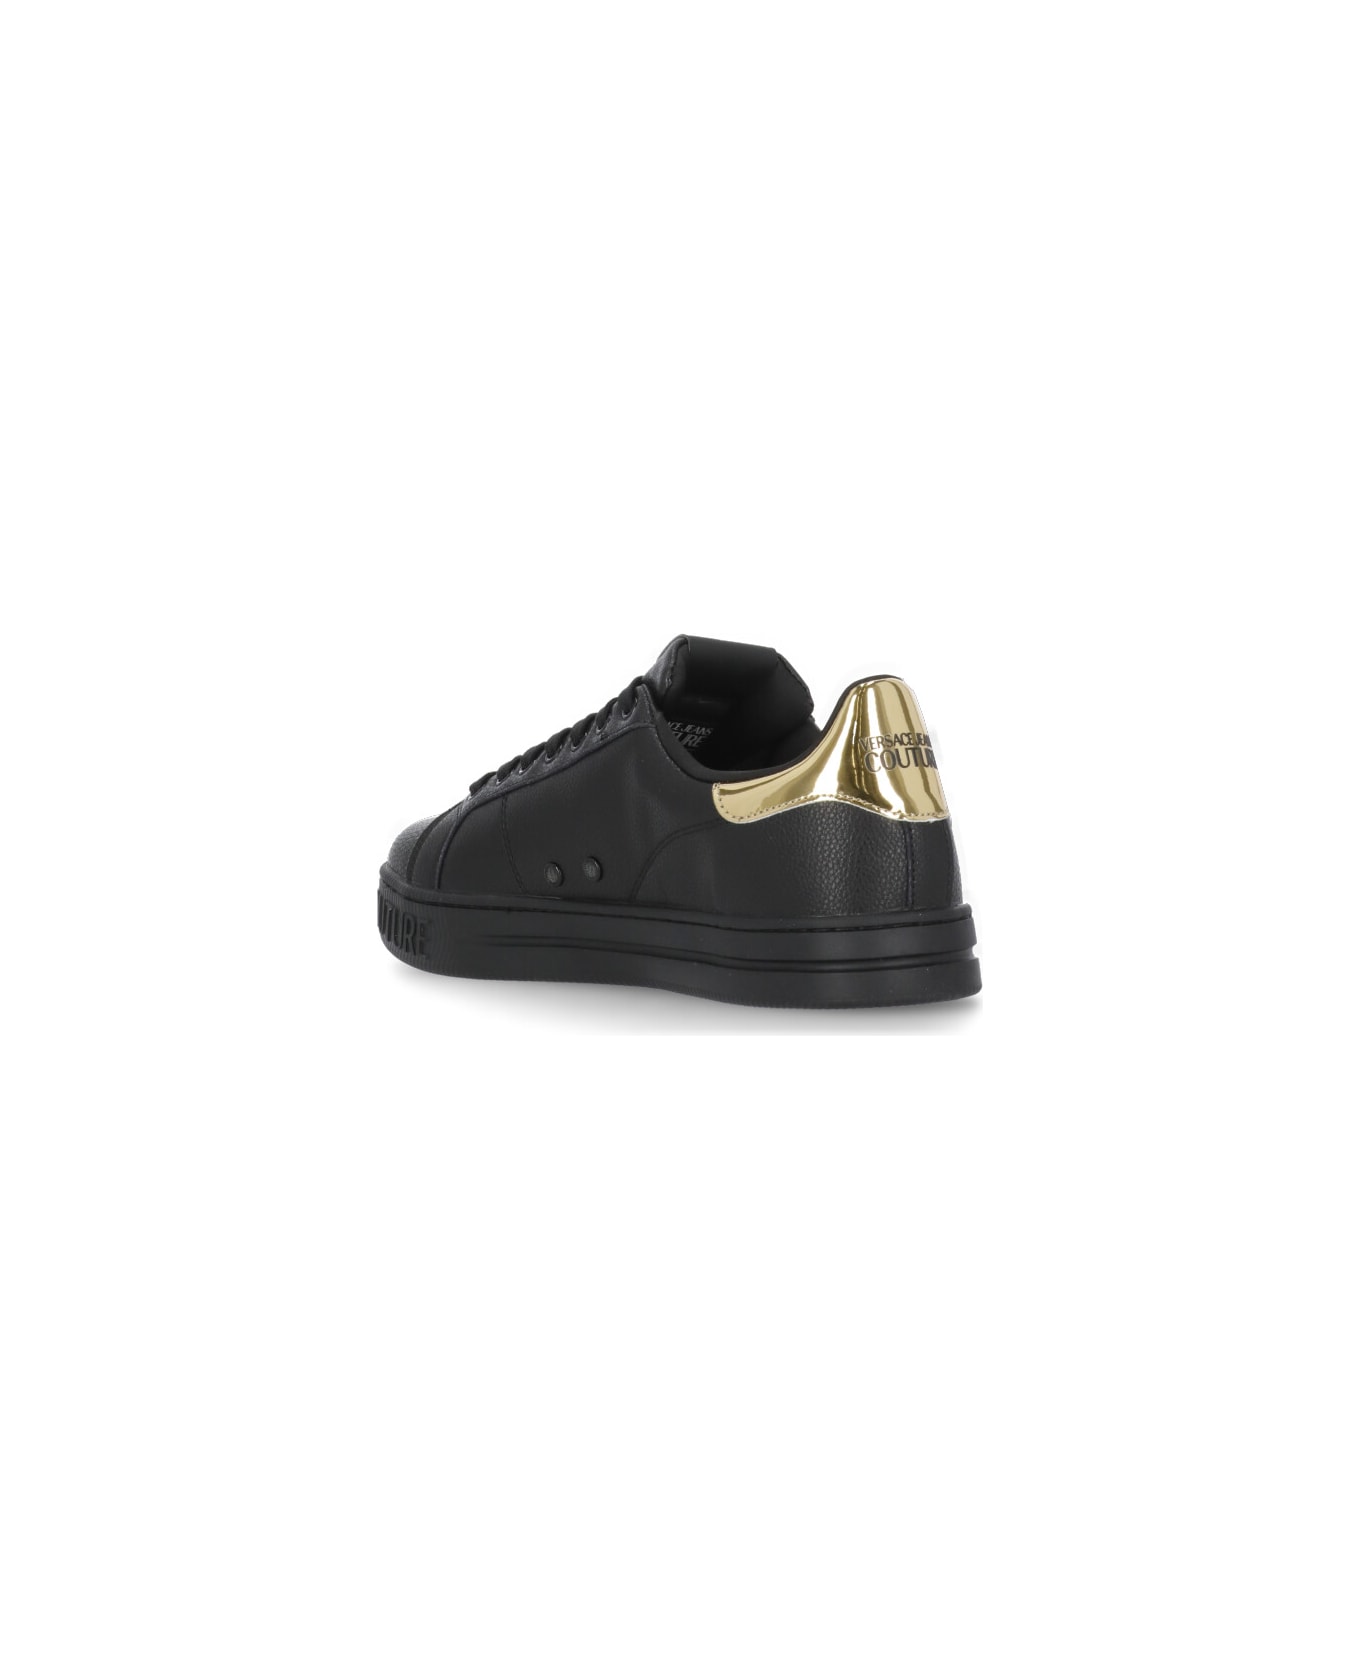 Versace Jeans Couture Court 88 Sneakers - Black スニーカー